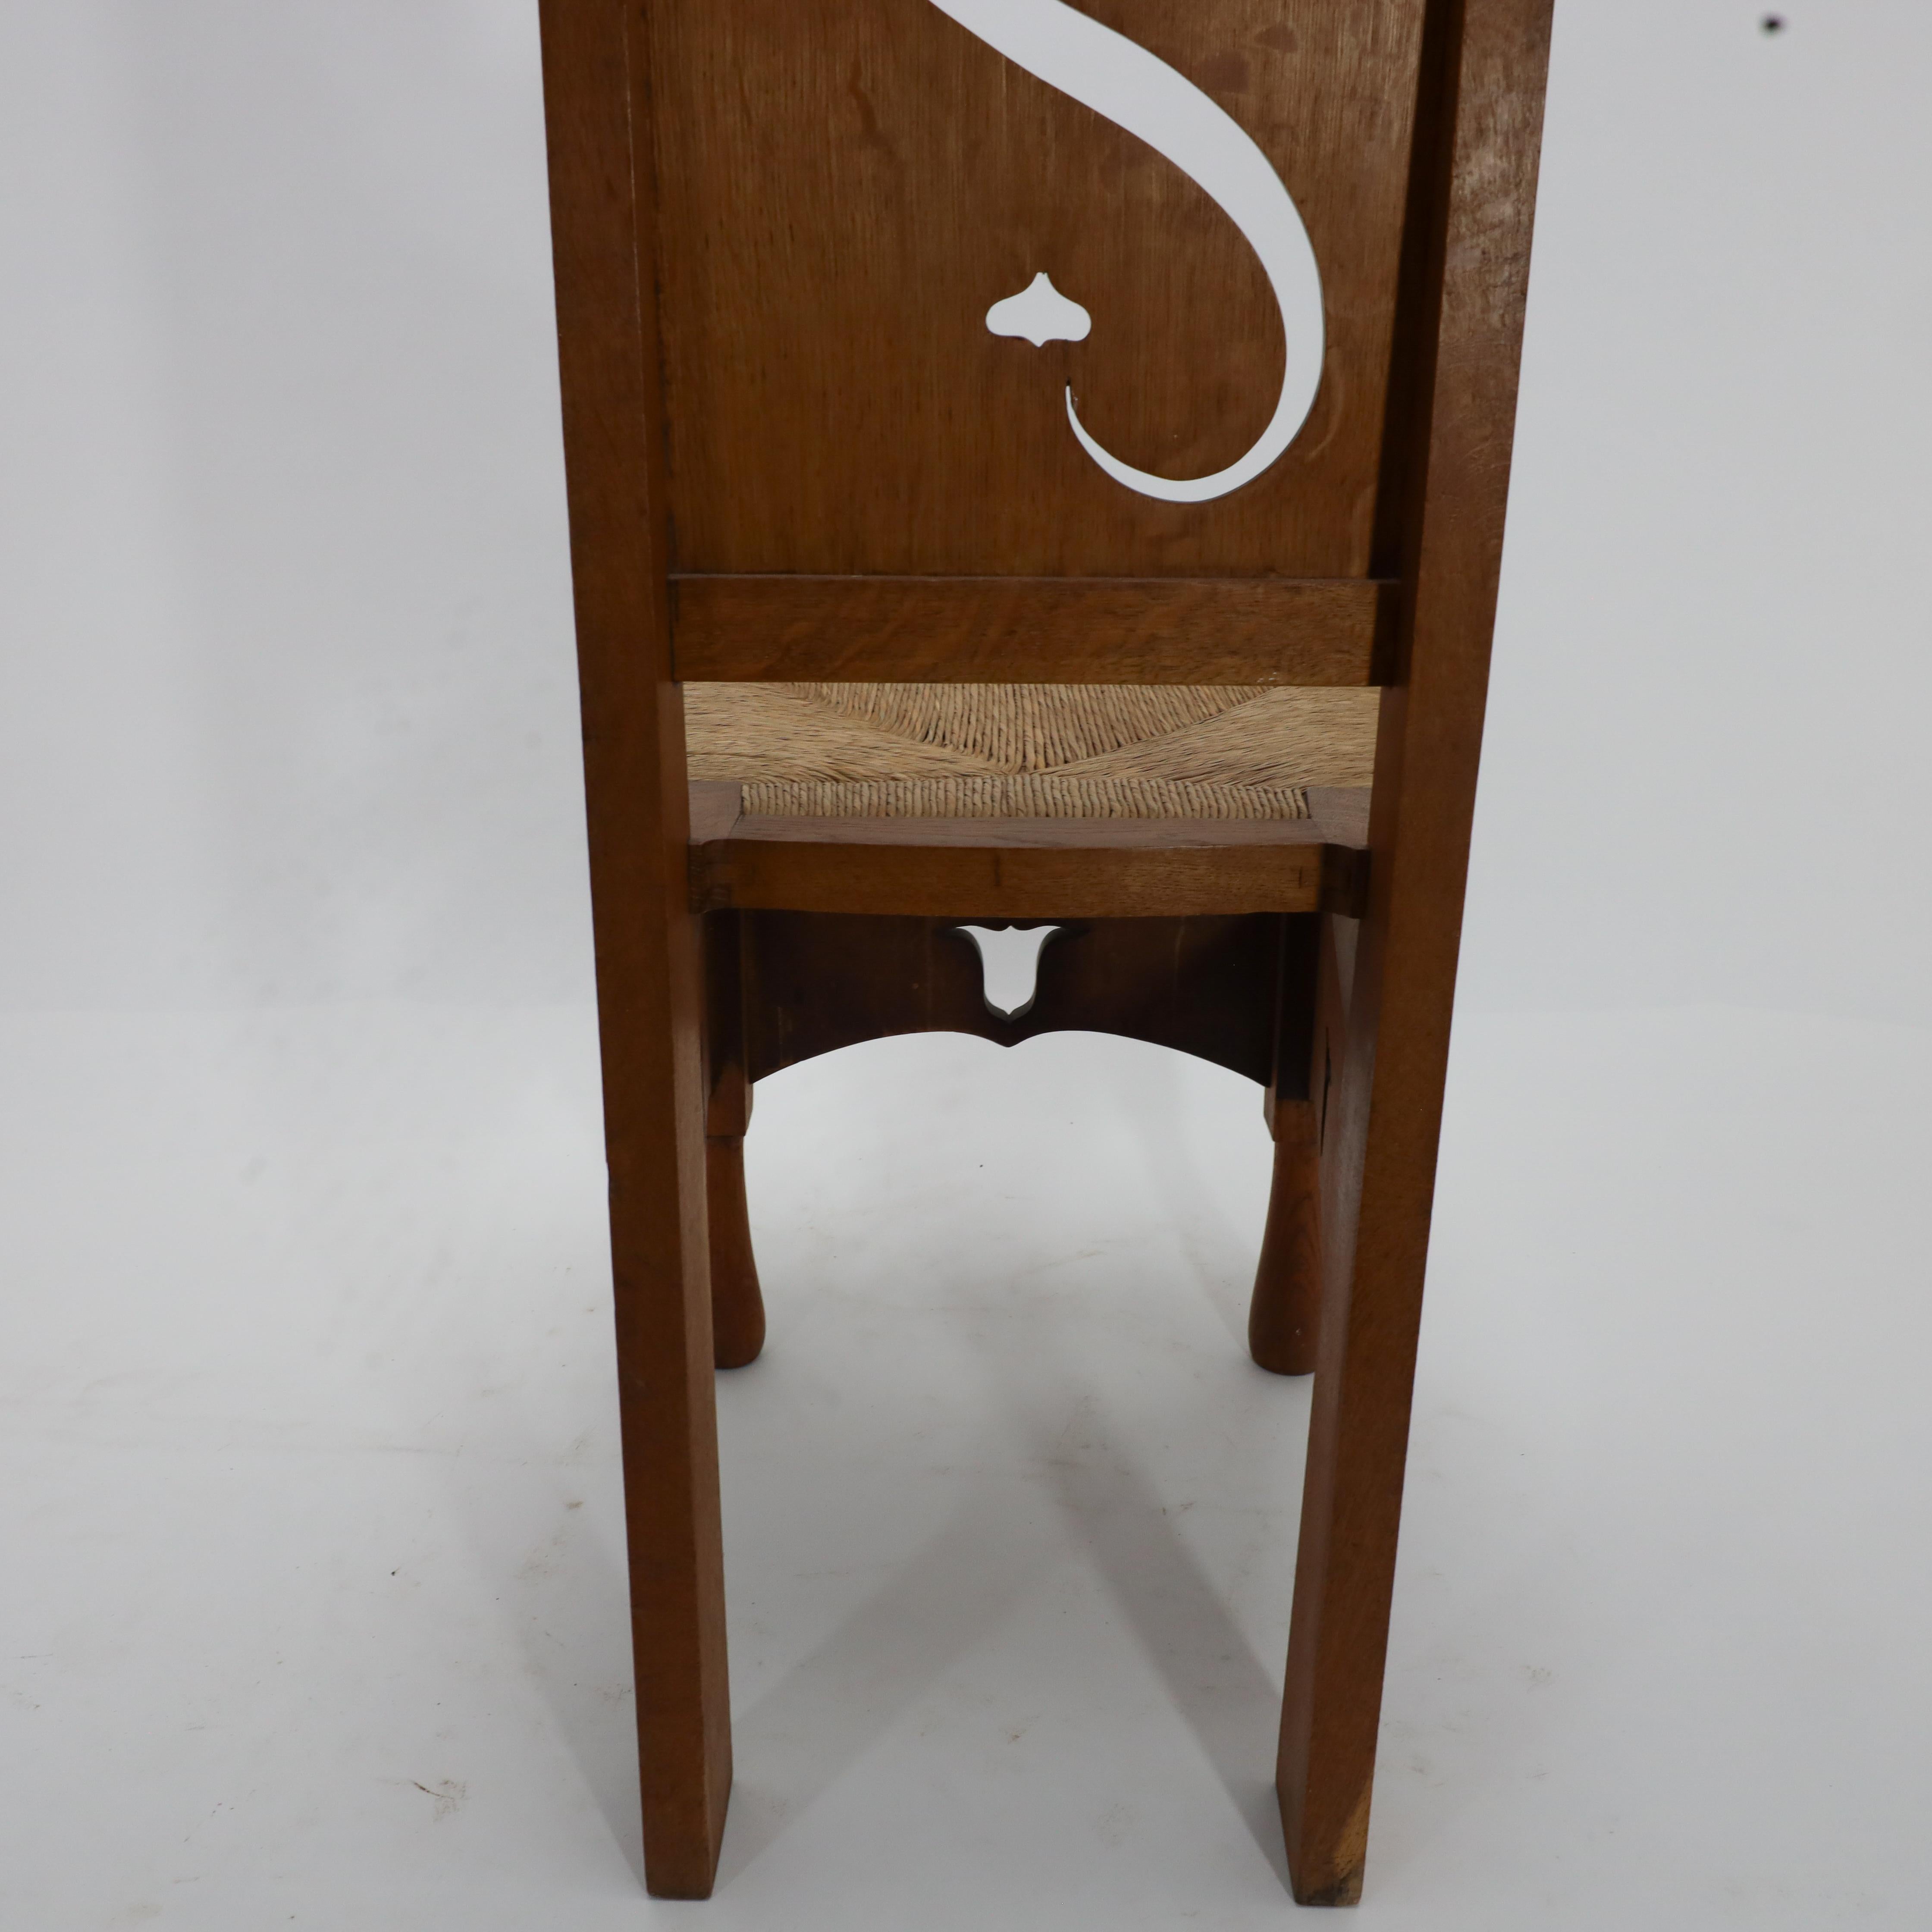 M H Baillie Scott attri An Arts & Crafts Oak Chair With Stylised Floral Cut-Outs For Sale 7